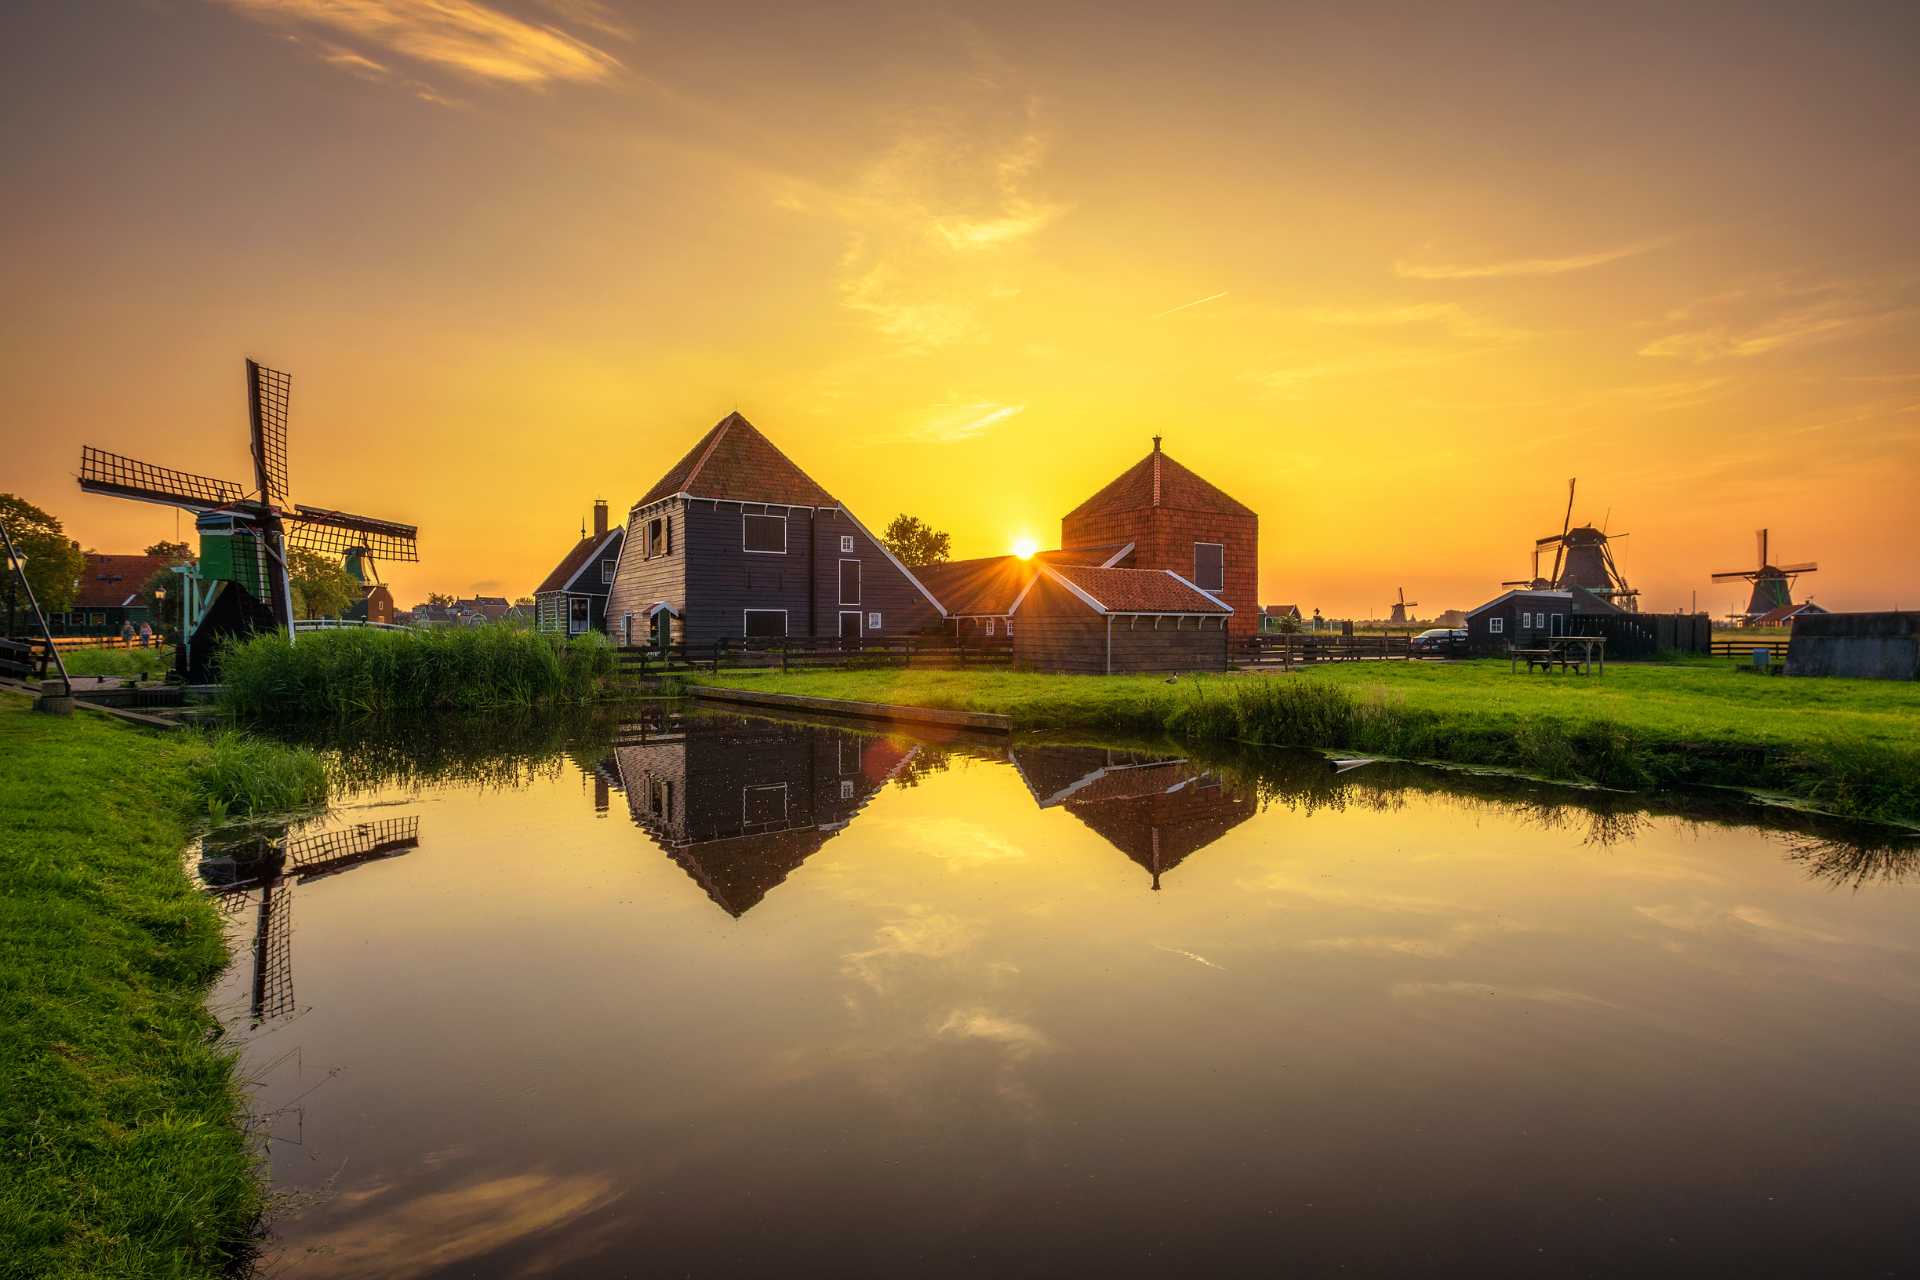 Sunset above farm houses and windmills of Zaanse Schans in the Netherlands ©Getty Images